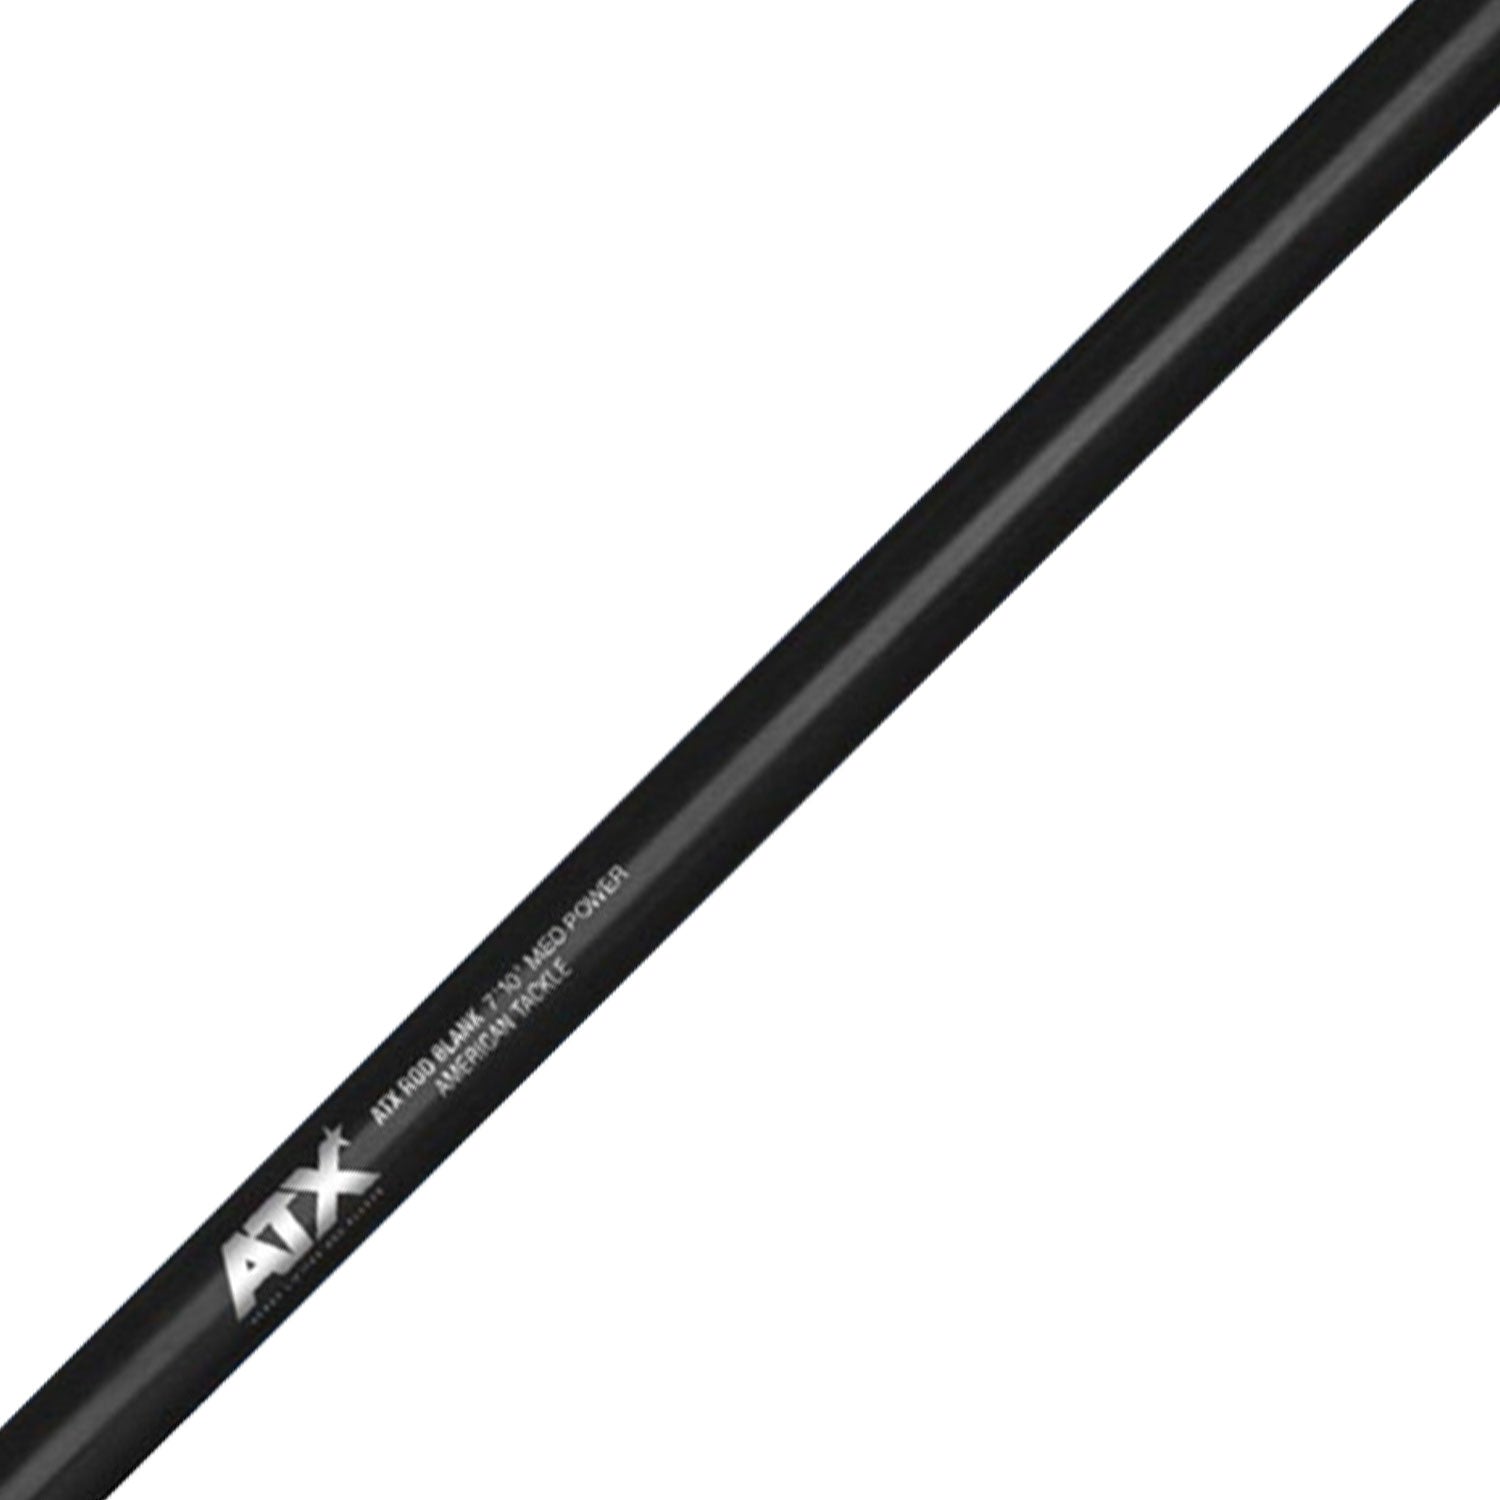 American Tackle AXC70L Graphite Casting Rod Blank